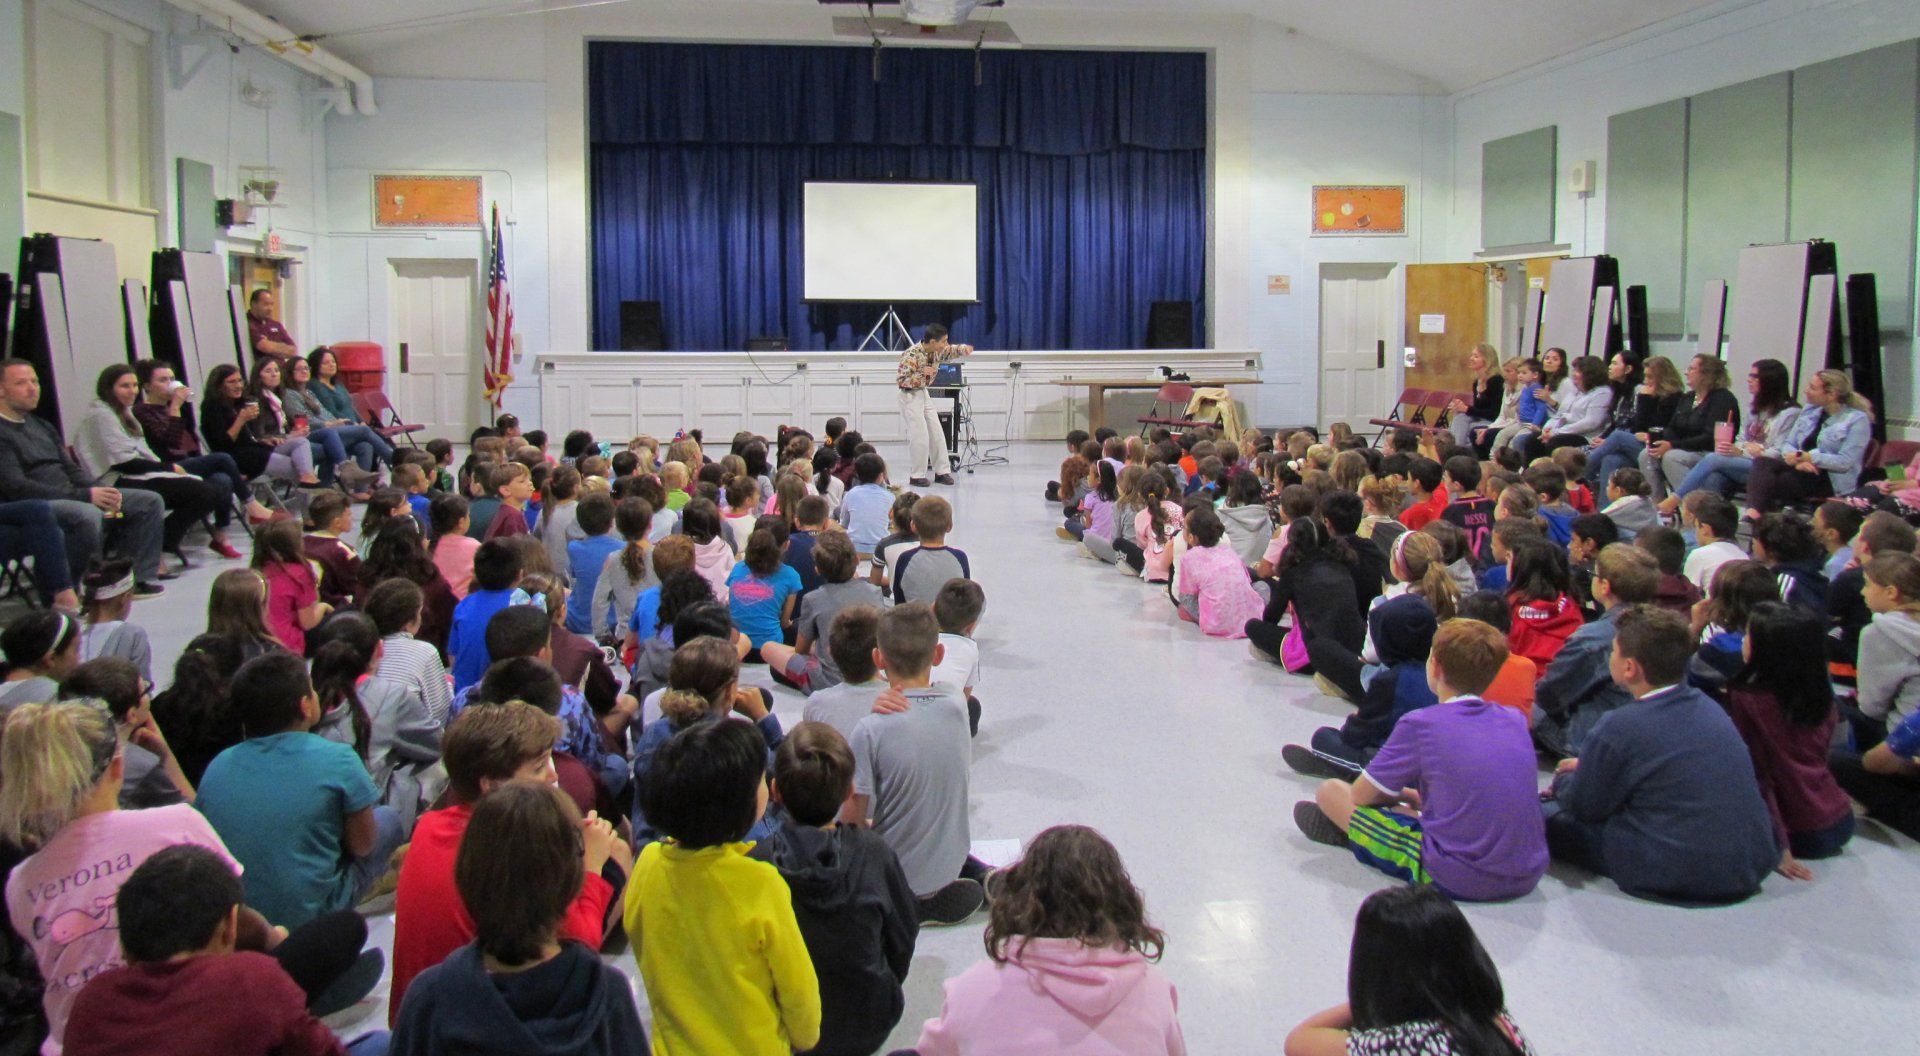 school assemblies on disability awareness and character education